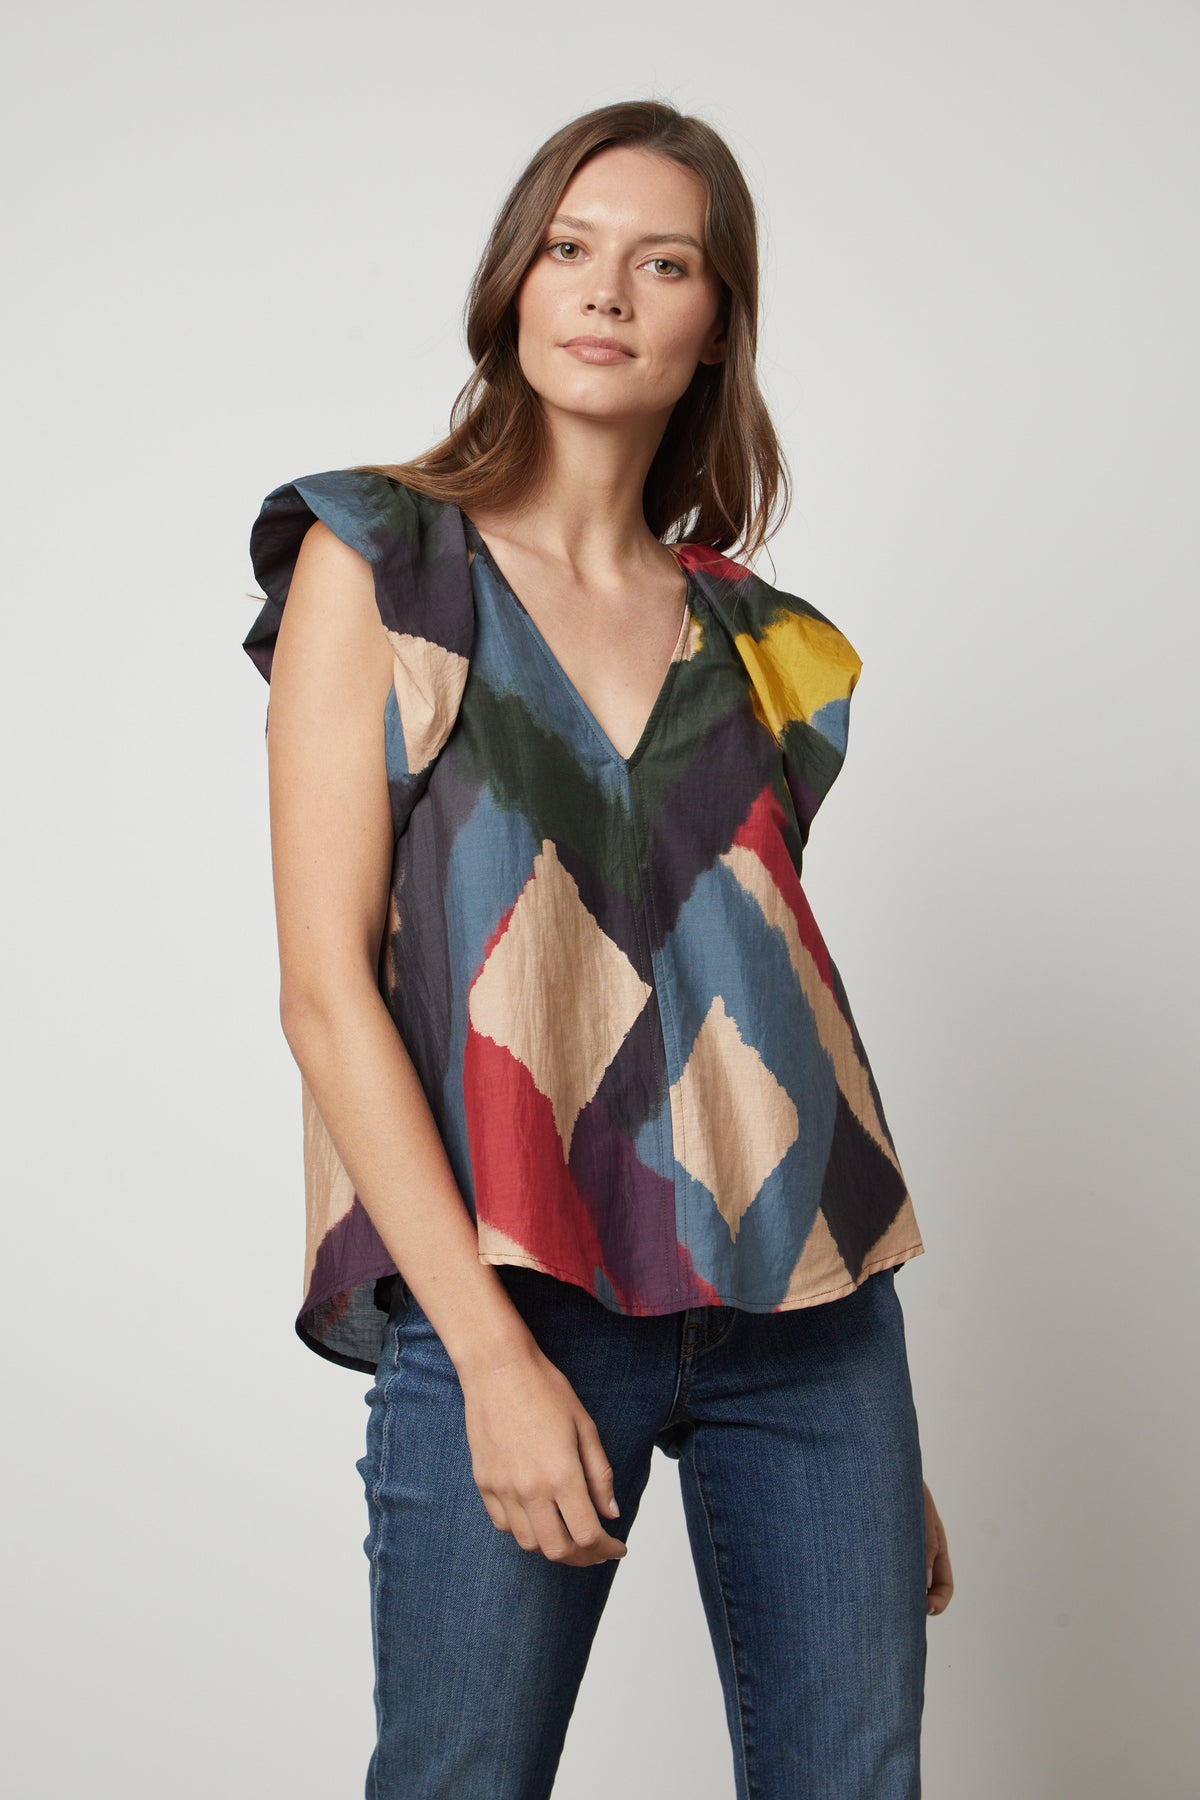   A woman wearing TAMARA PRINTED TOP by Velvet by Graham & Spencer jeans and a colorful silk cotton voile top with flutter sleeves. 